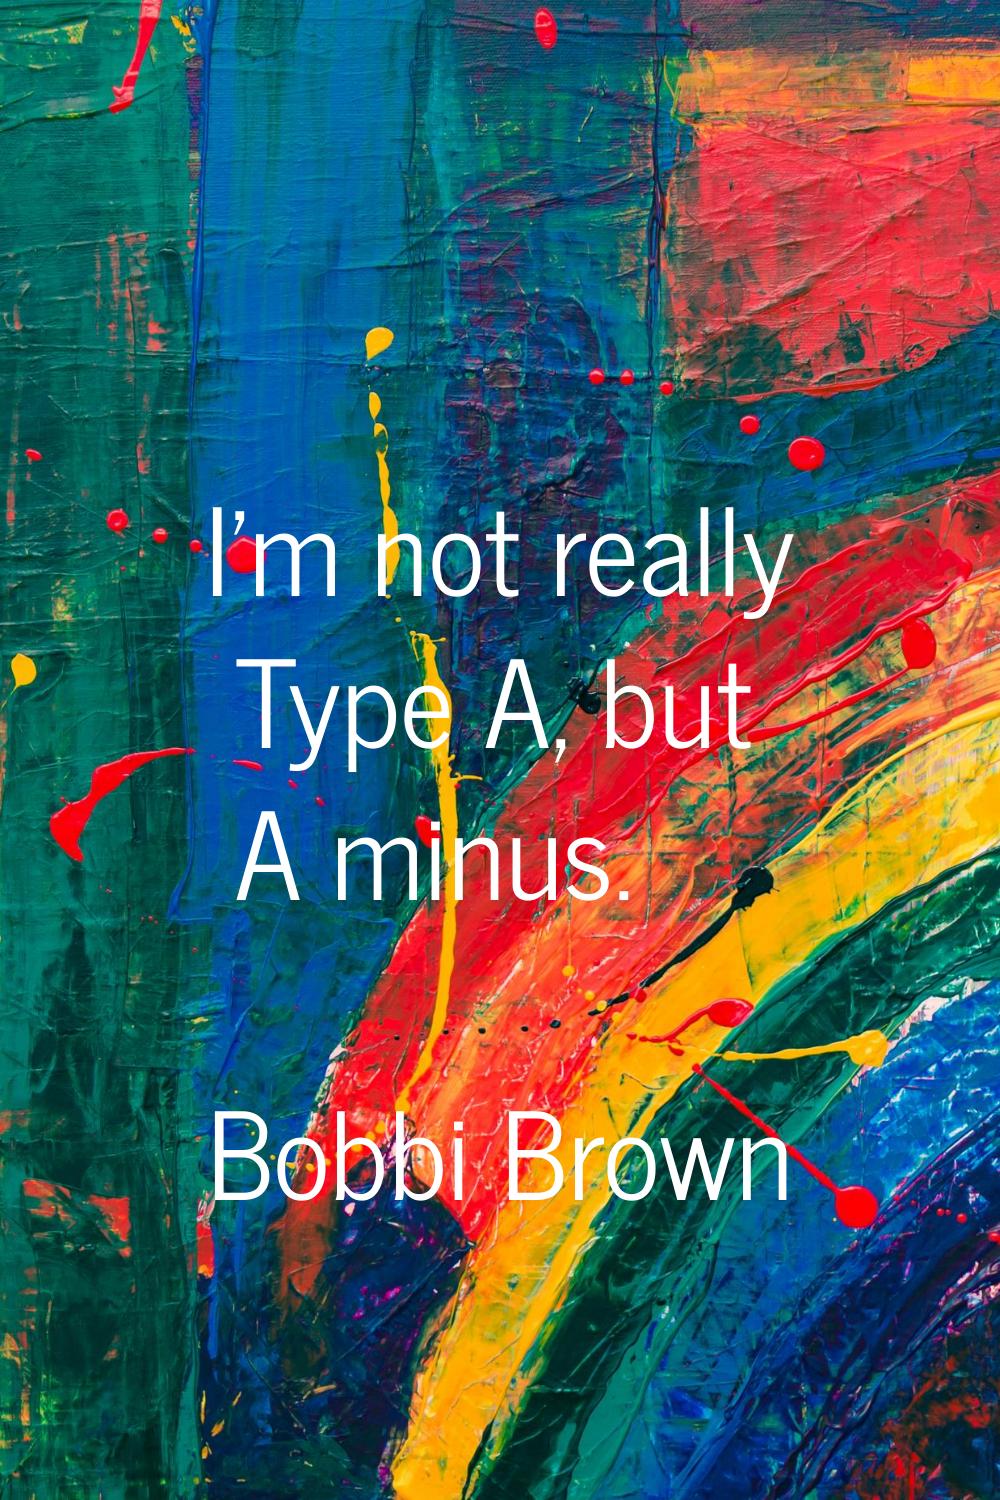 I'm not really Type A, but A minus.